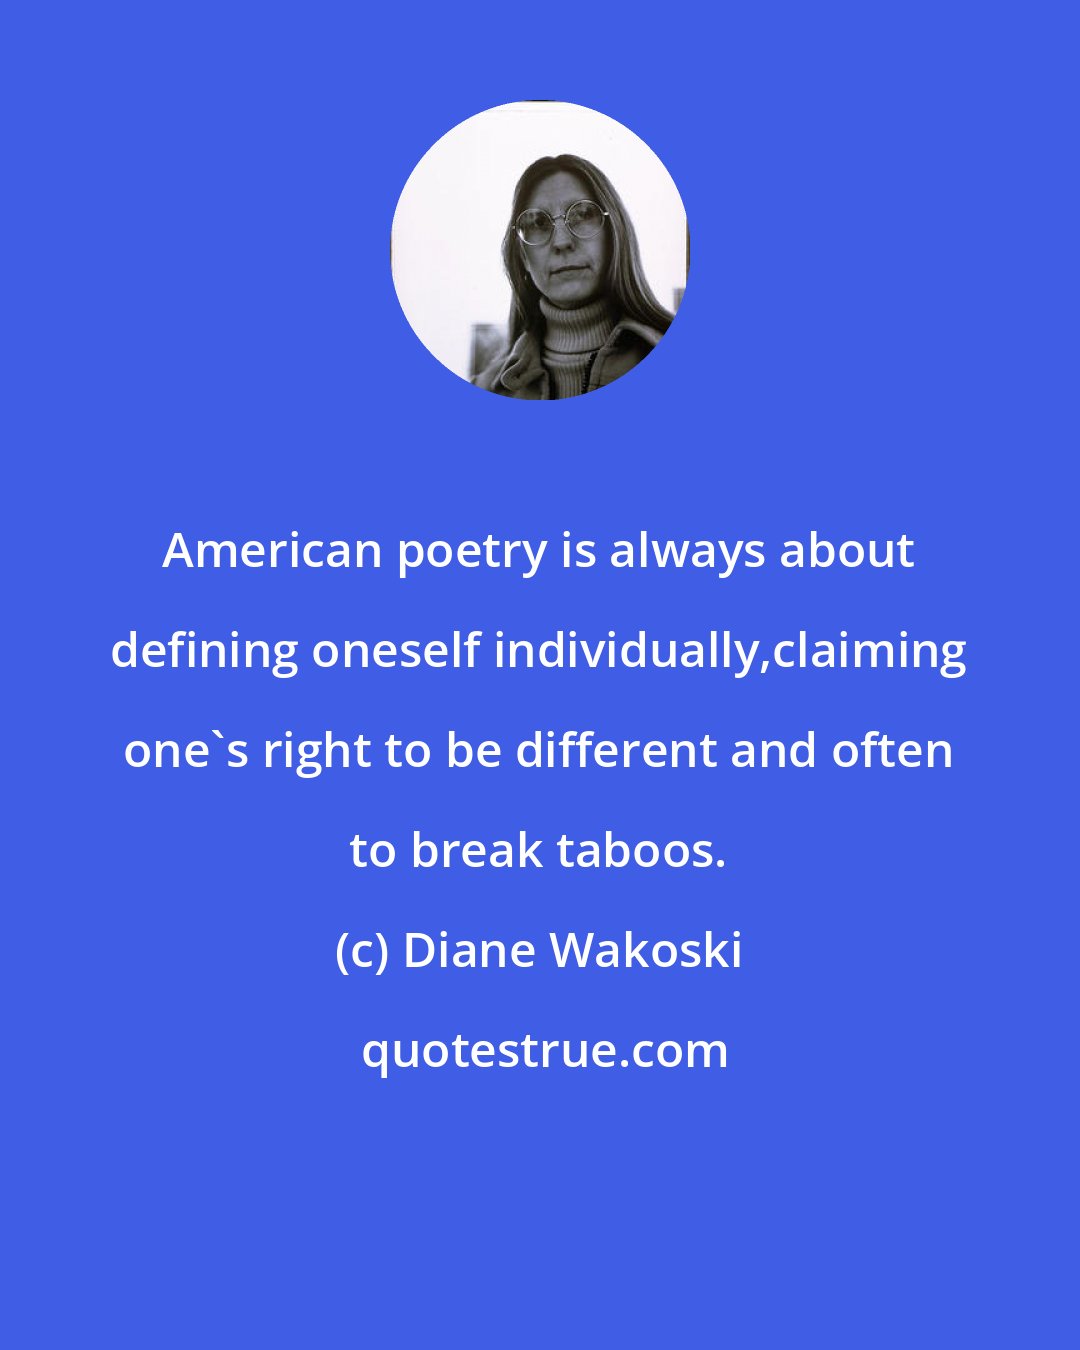 Diane Wakoski: American poetry is always about defining oneself individually,claiming one's right to be different and often to break taboos.